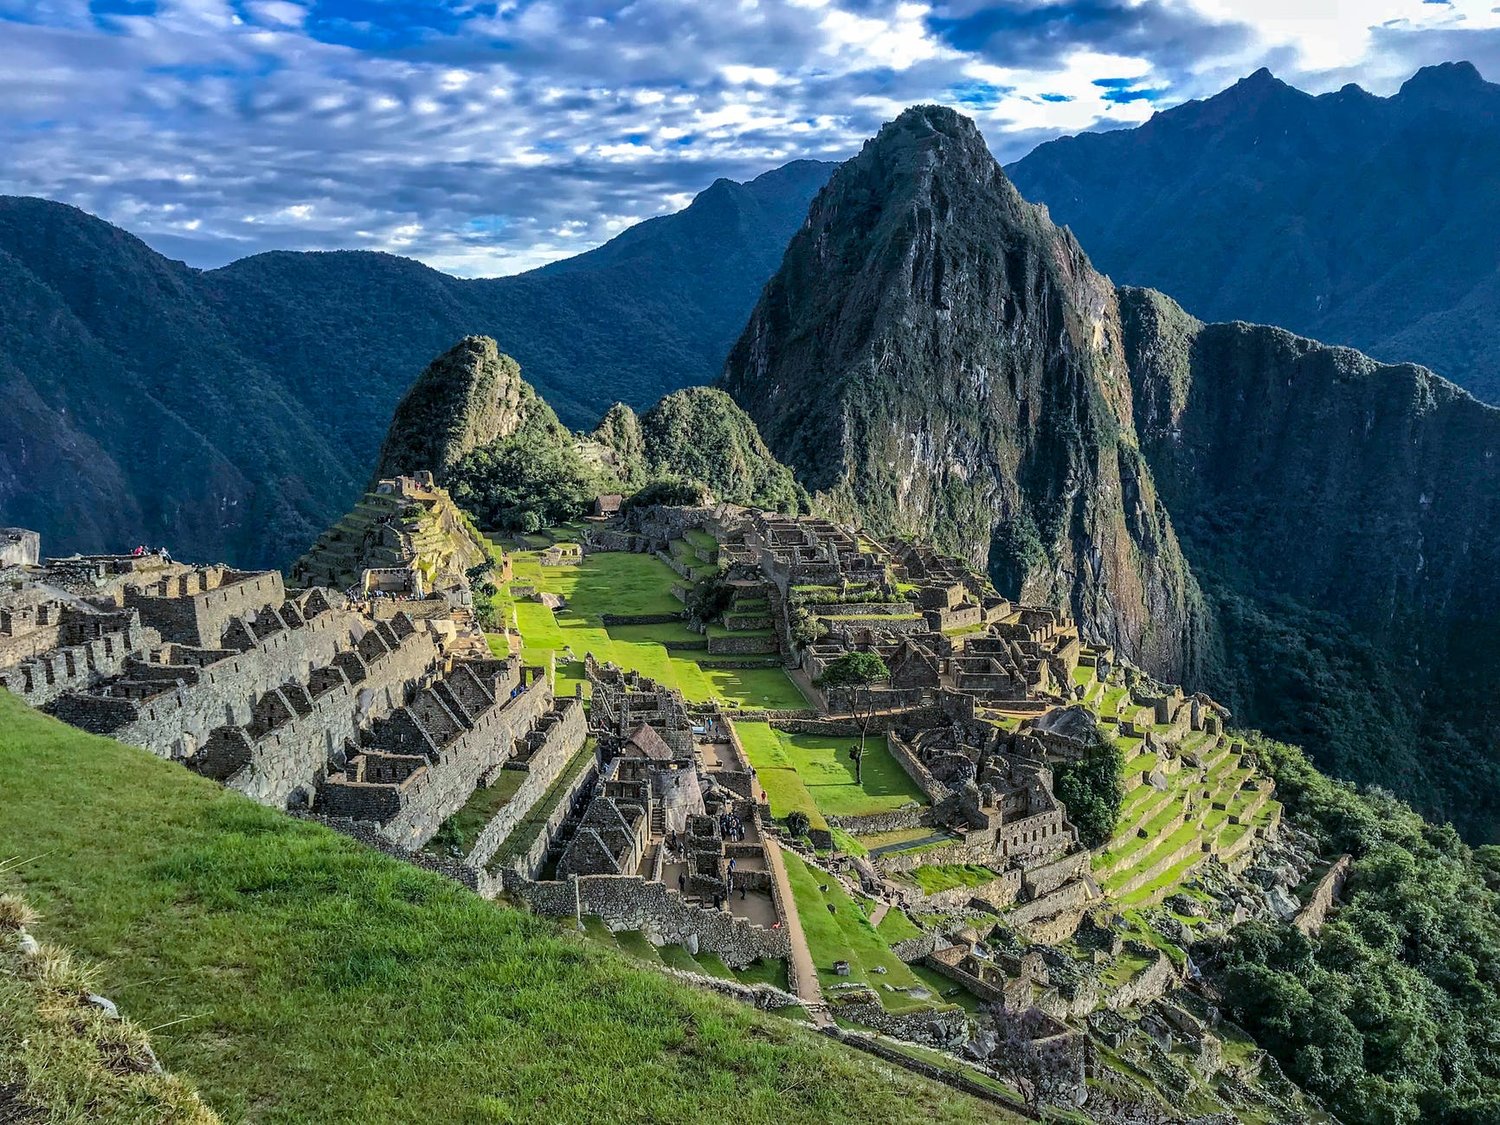 Several companies are offering a variety of learning experiencing online, including one website that offers a virtual visit to Peru’s Machu Picchu.